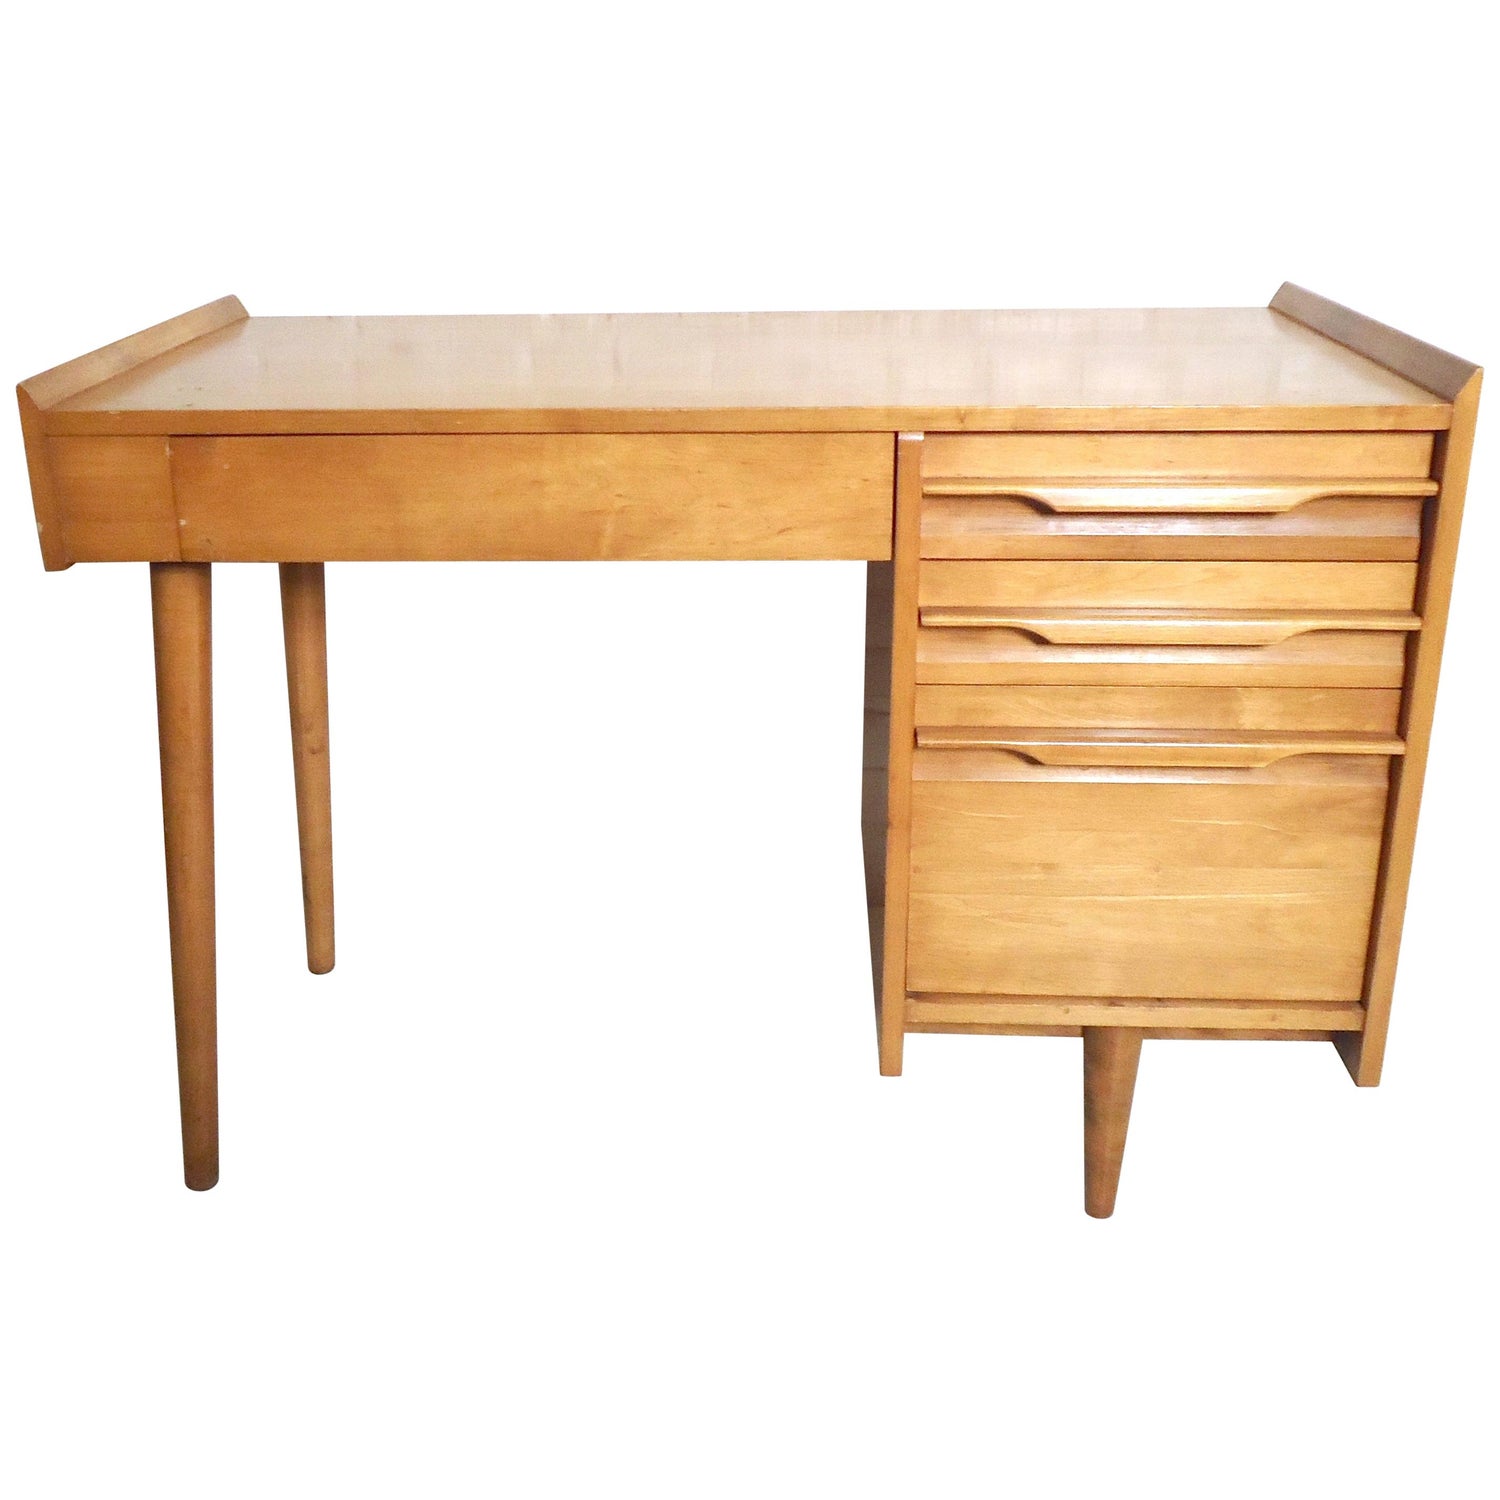 Mid Century Modern Desk By Crawford Furniture For Sale At 1stdibs